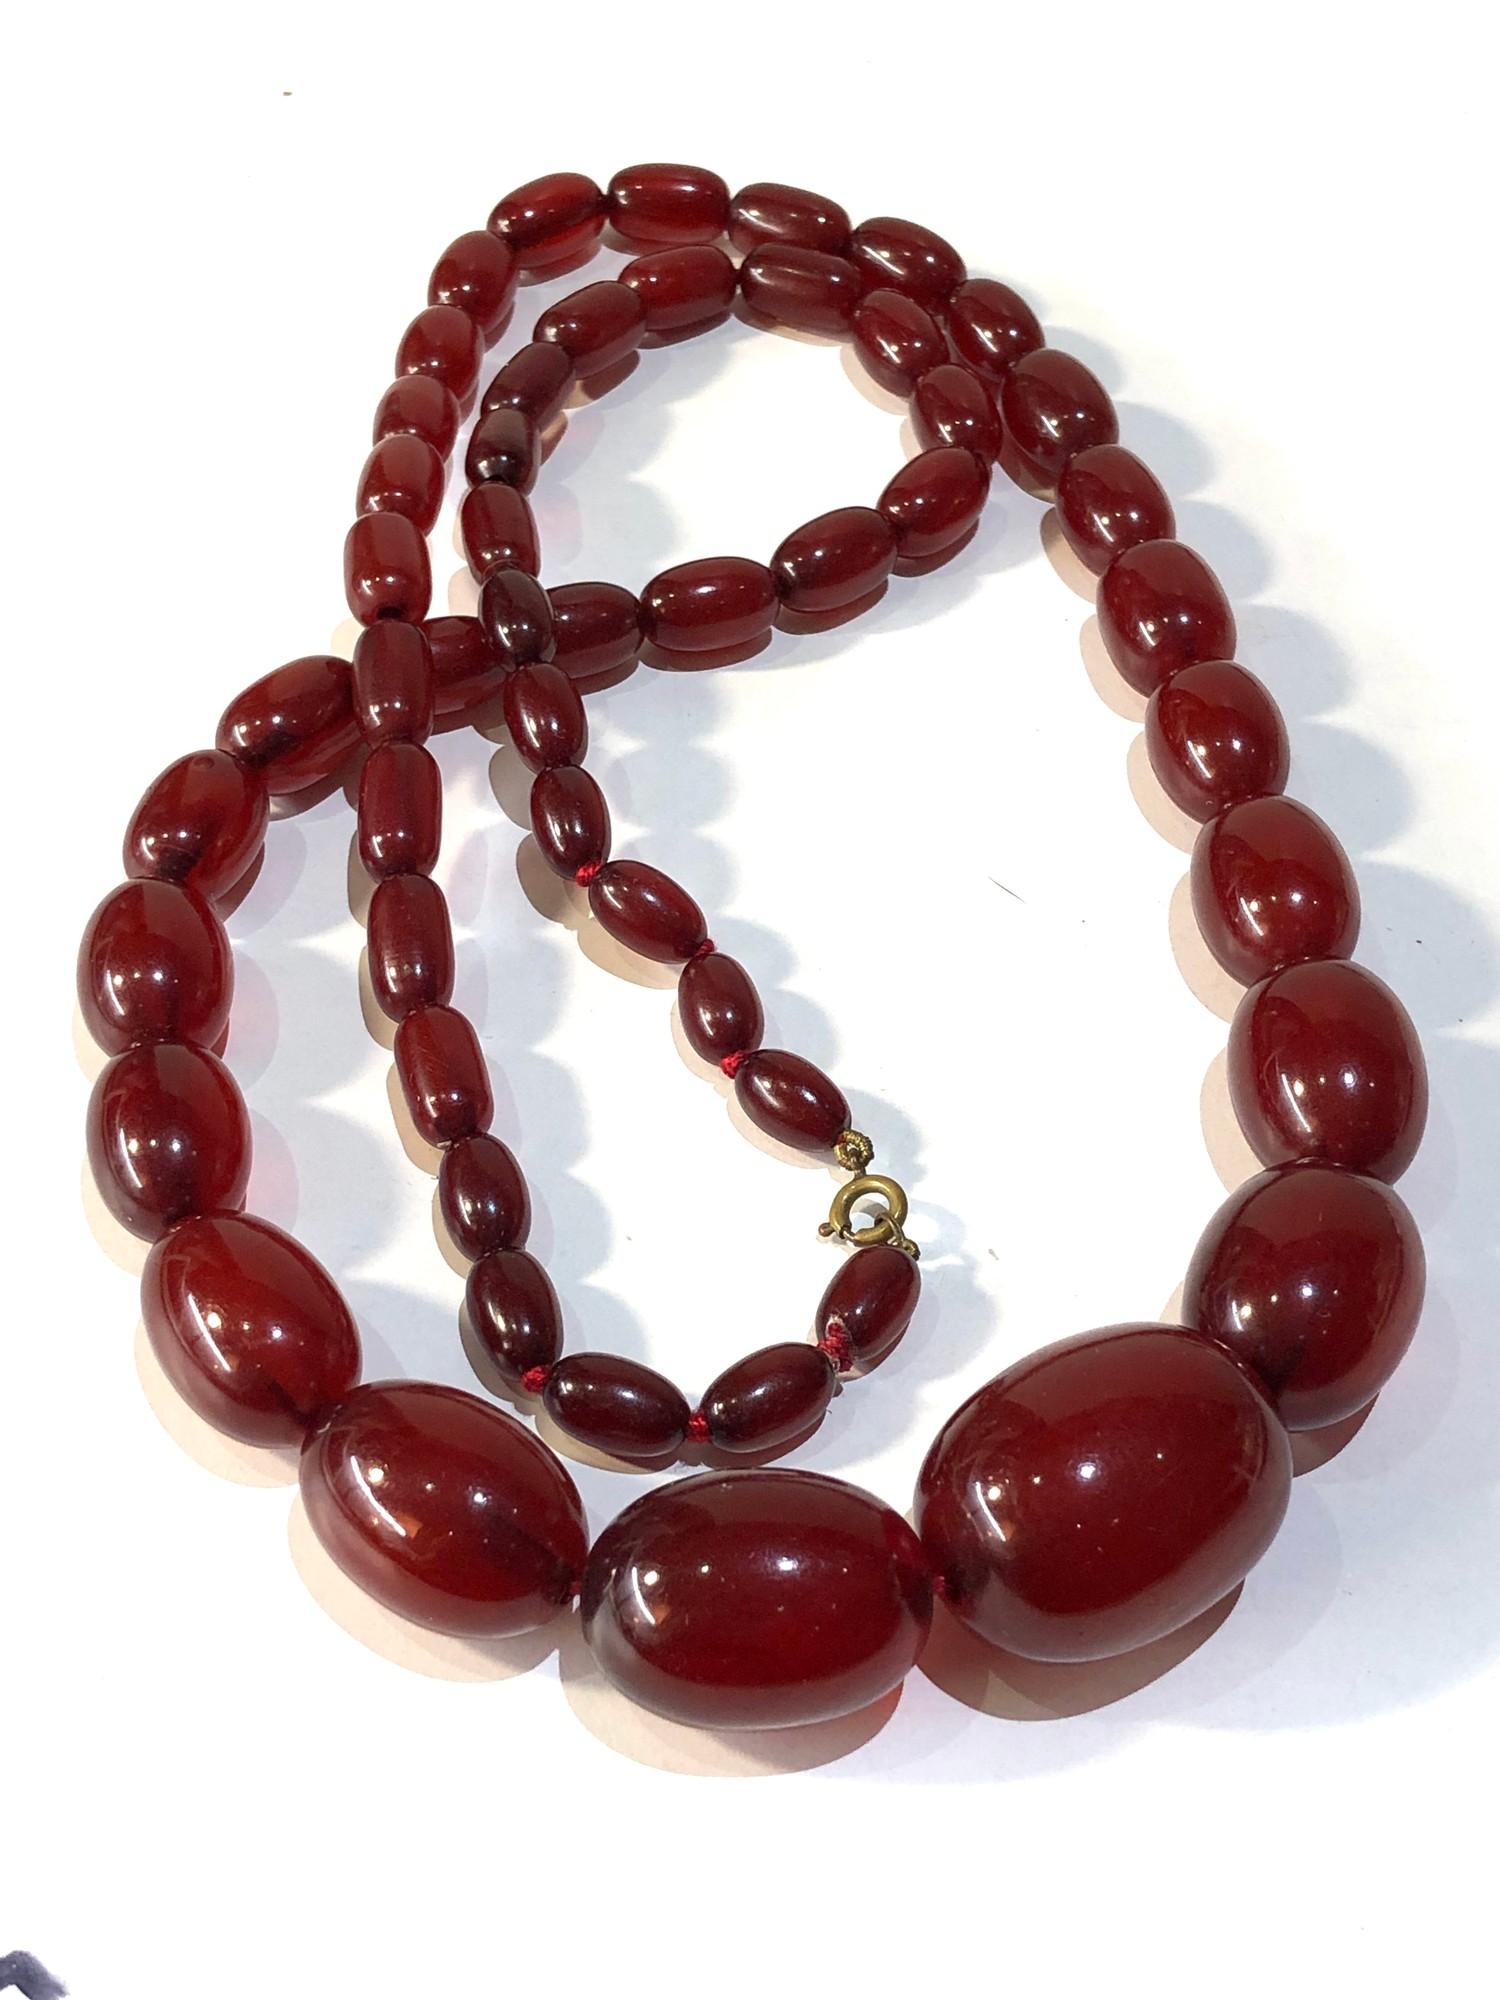 Antique cherry amber / bakelite bead necklace largest bead measures approx 3.1cm by 2.3cm weight 90g